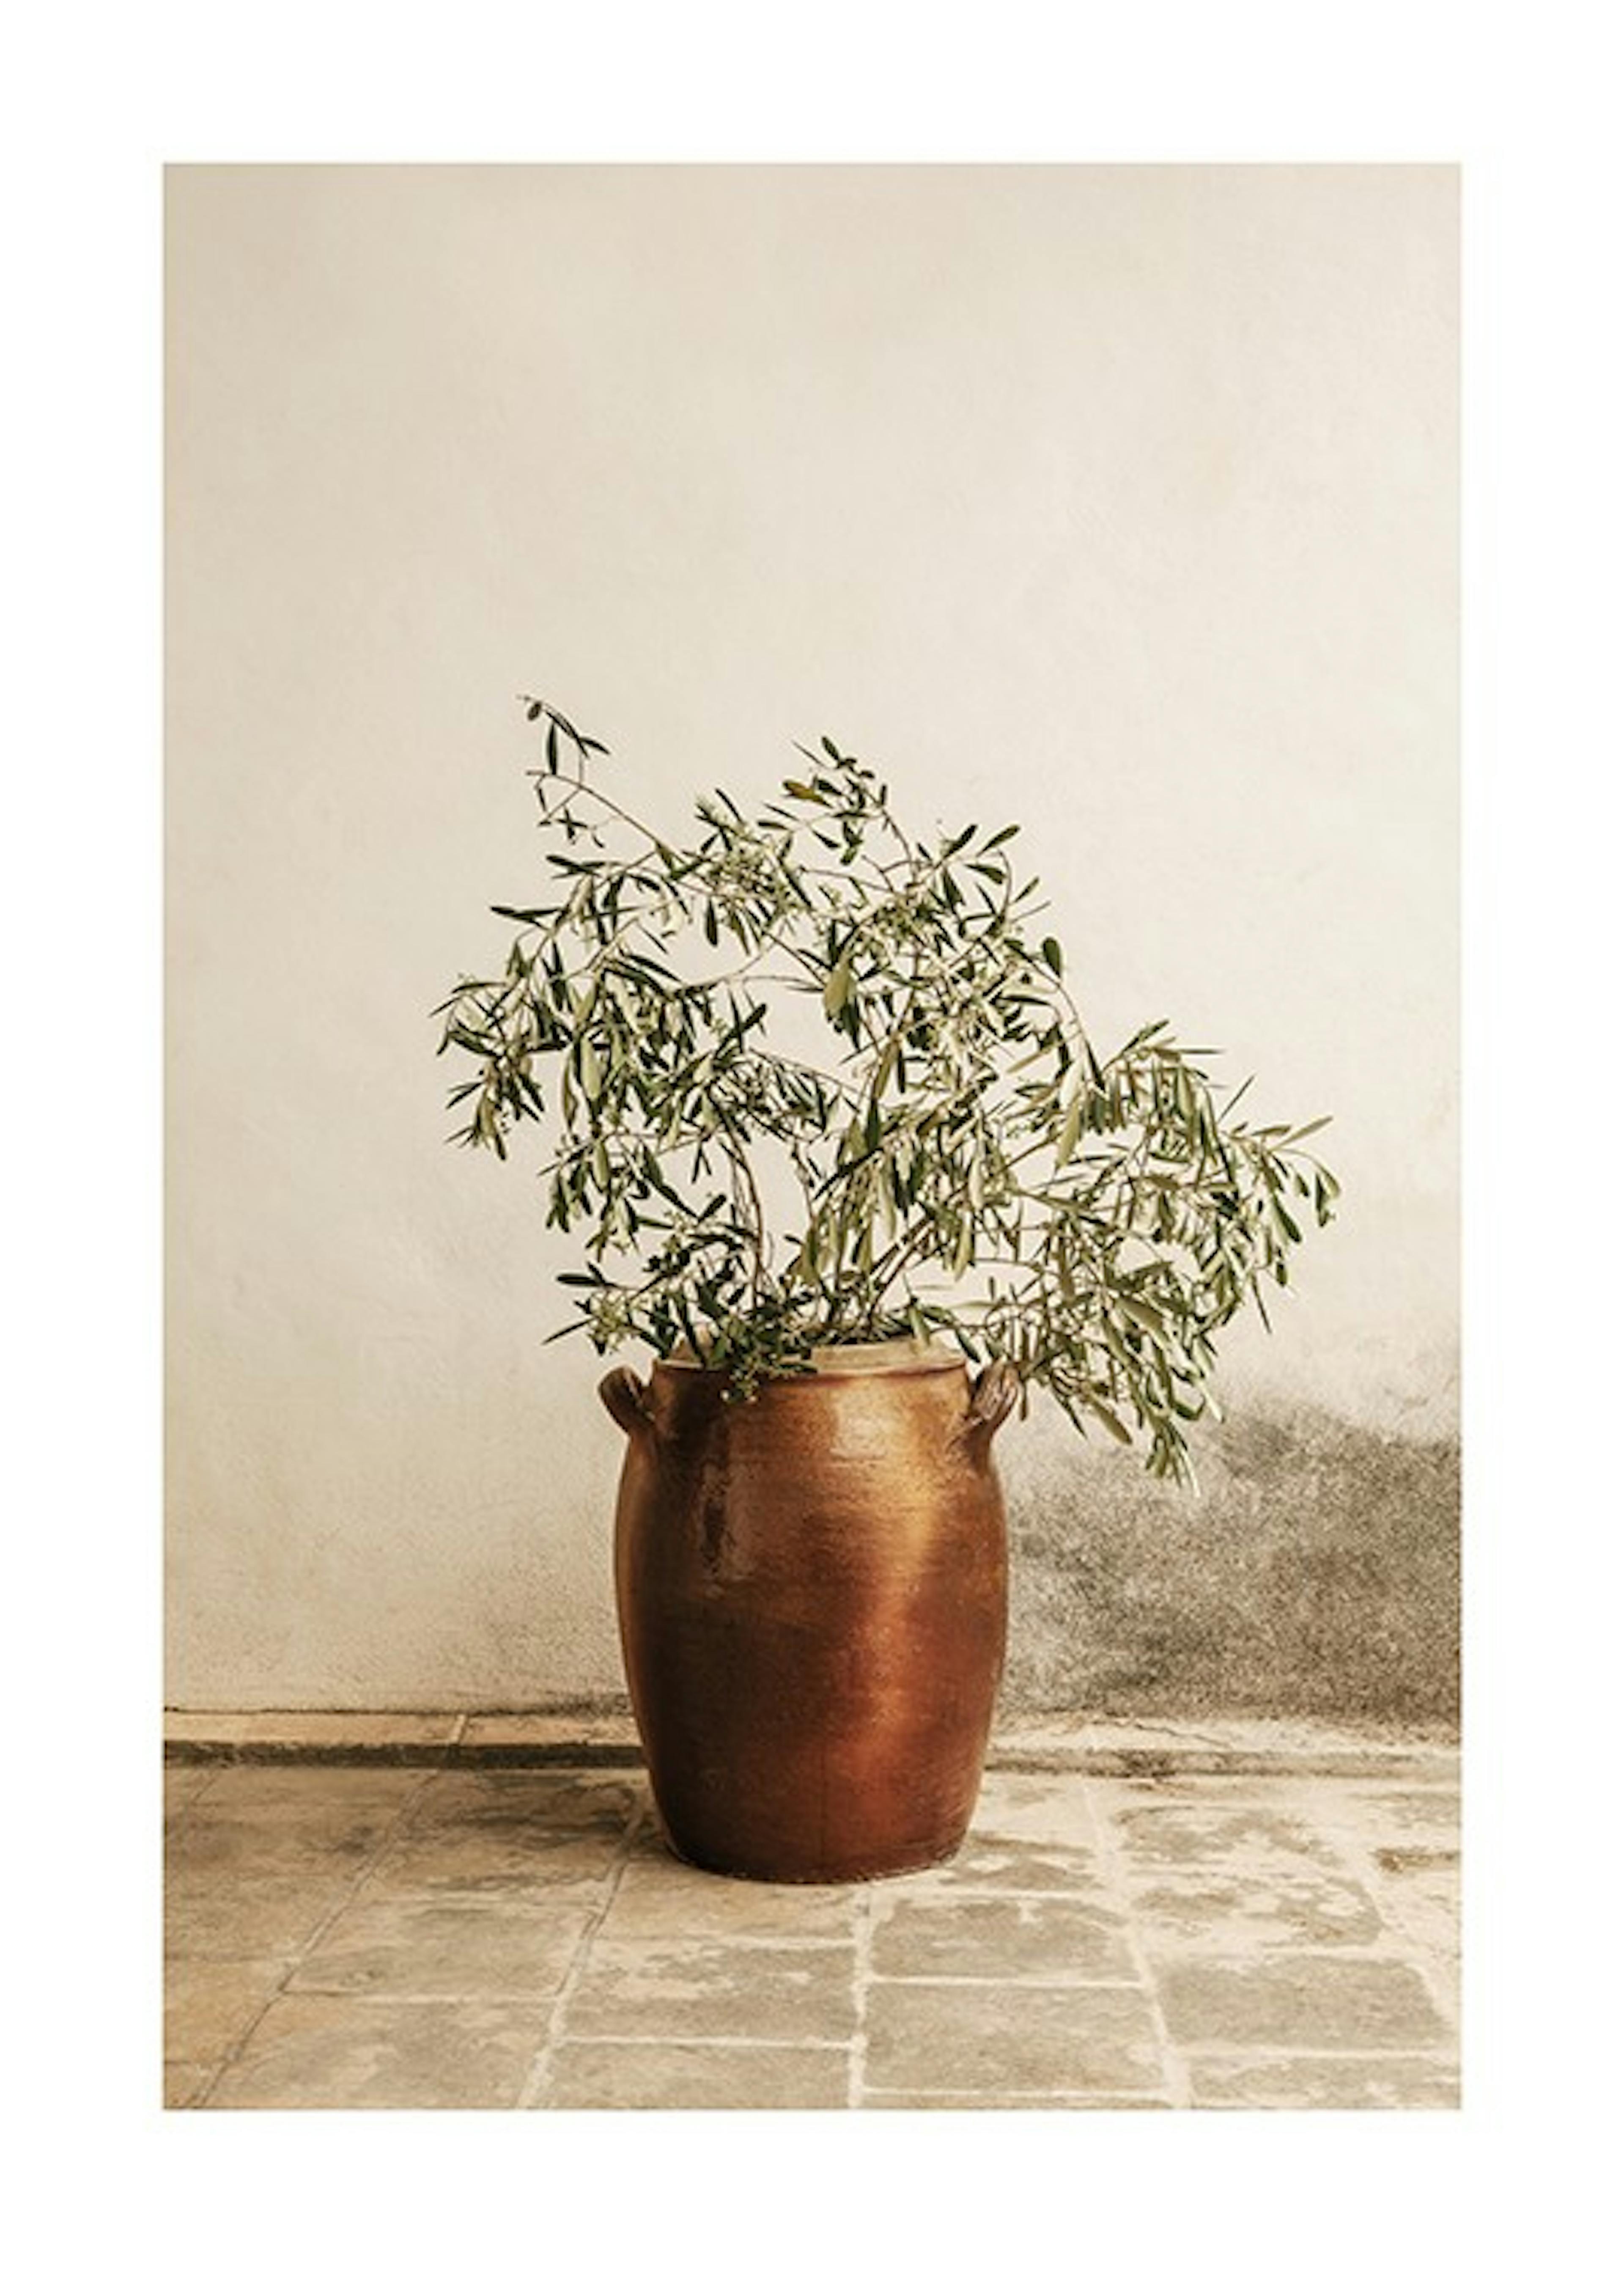 Rustic Olive Branch Print 0